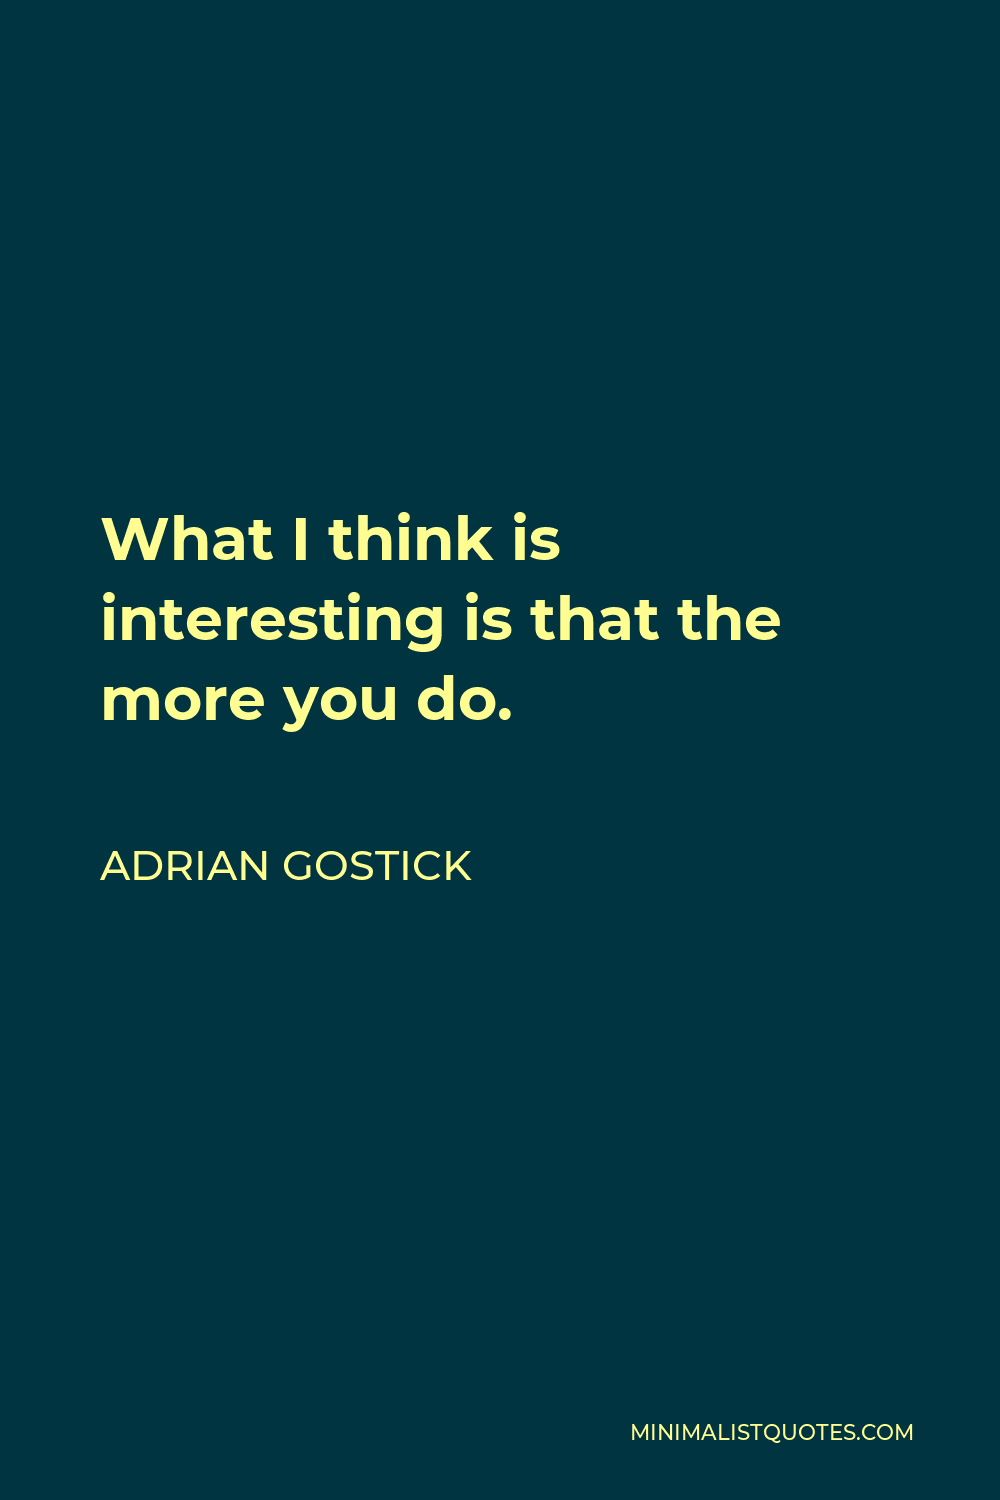 Adrian Gostick Quote - What I think is interesting is that the more you do.